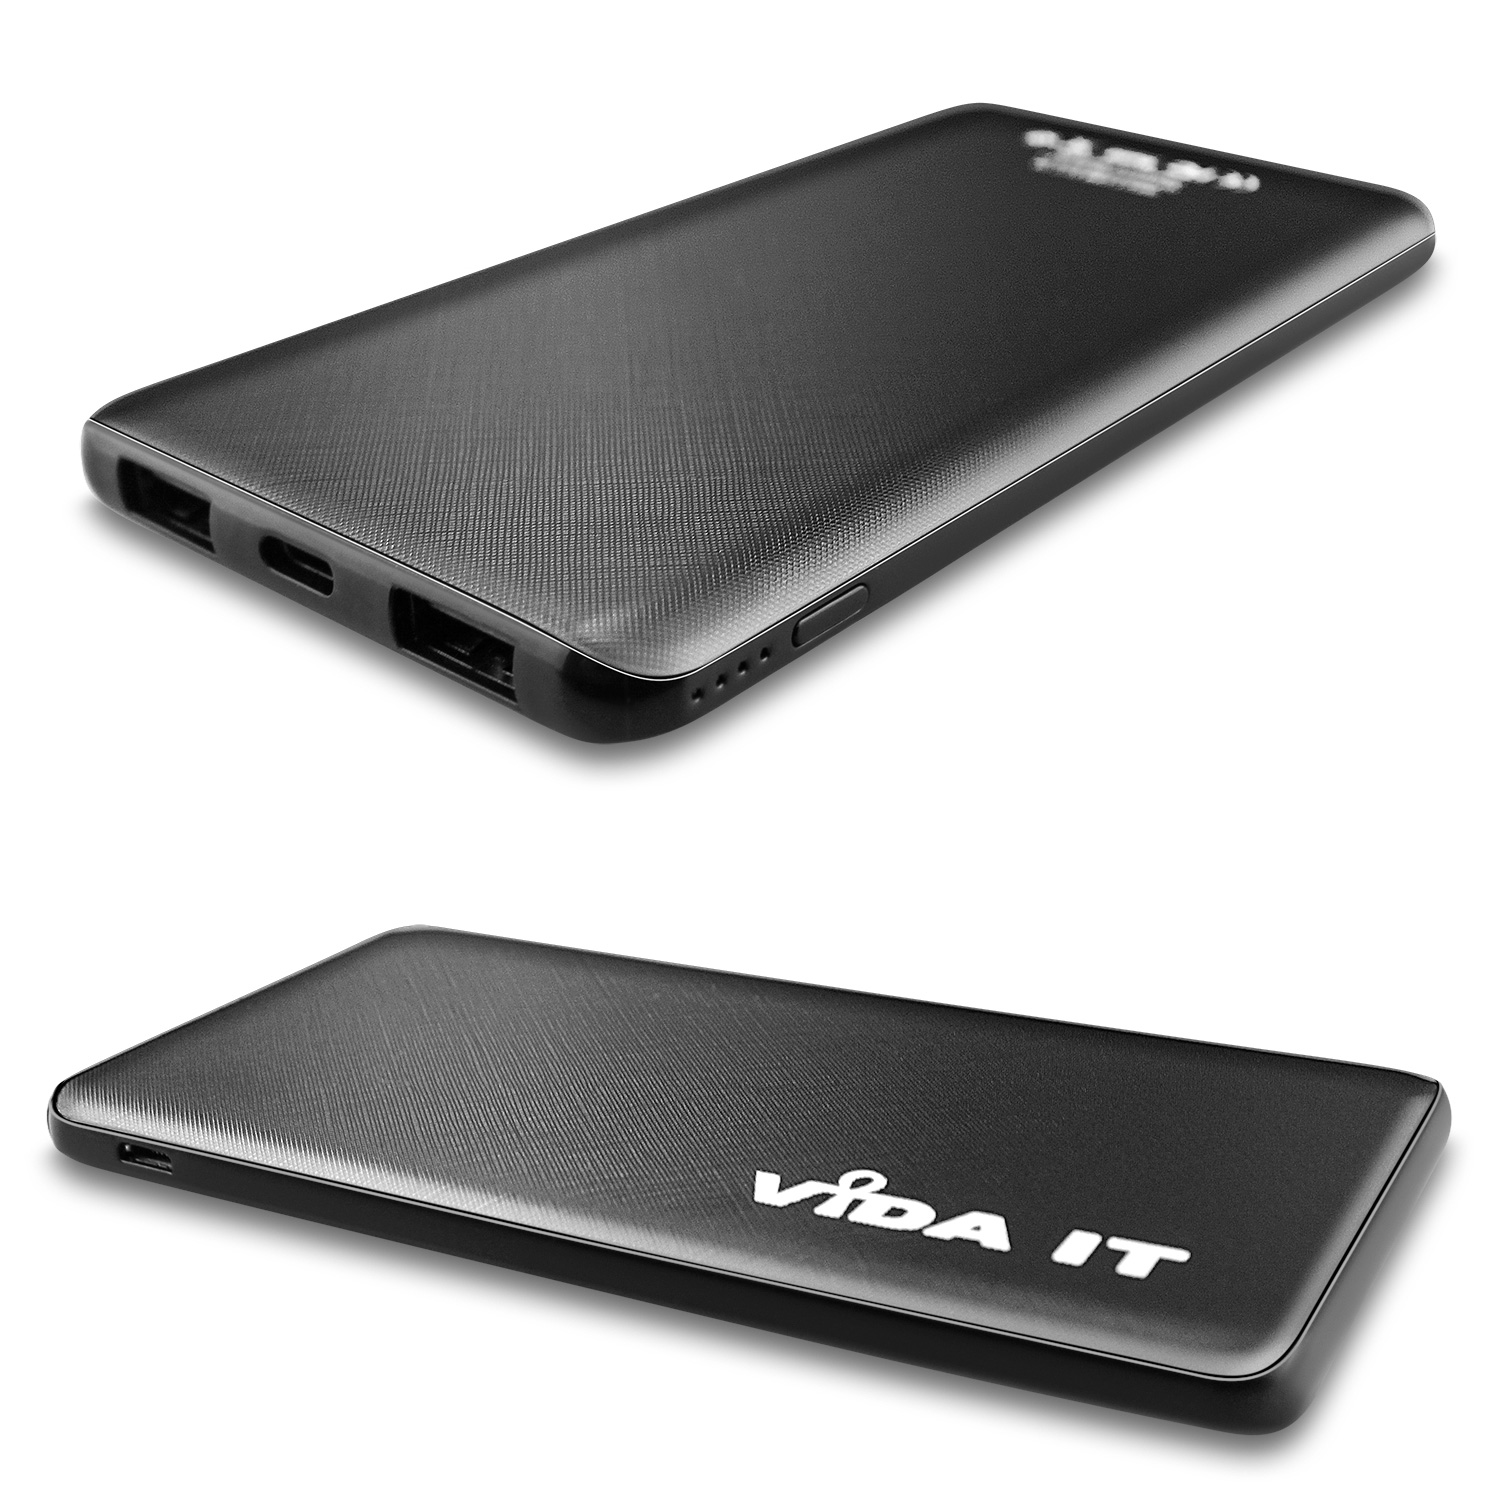 Vida IT V506 Lightweight 9mm Slim Design Travel Dual Port 5000mAh Power Bank Fast Charging 2A Portable External Emergency Battery Pack USB Charger in Black Colour with USB cable and Apple-Lightning and USB-C Adapters